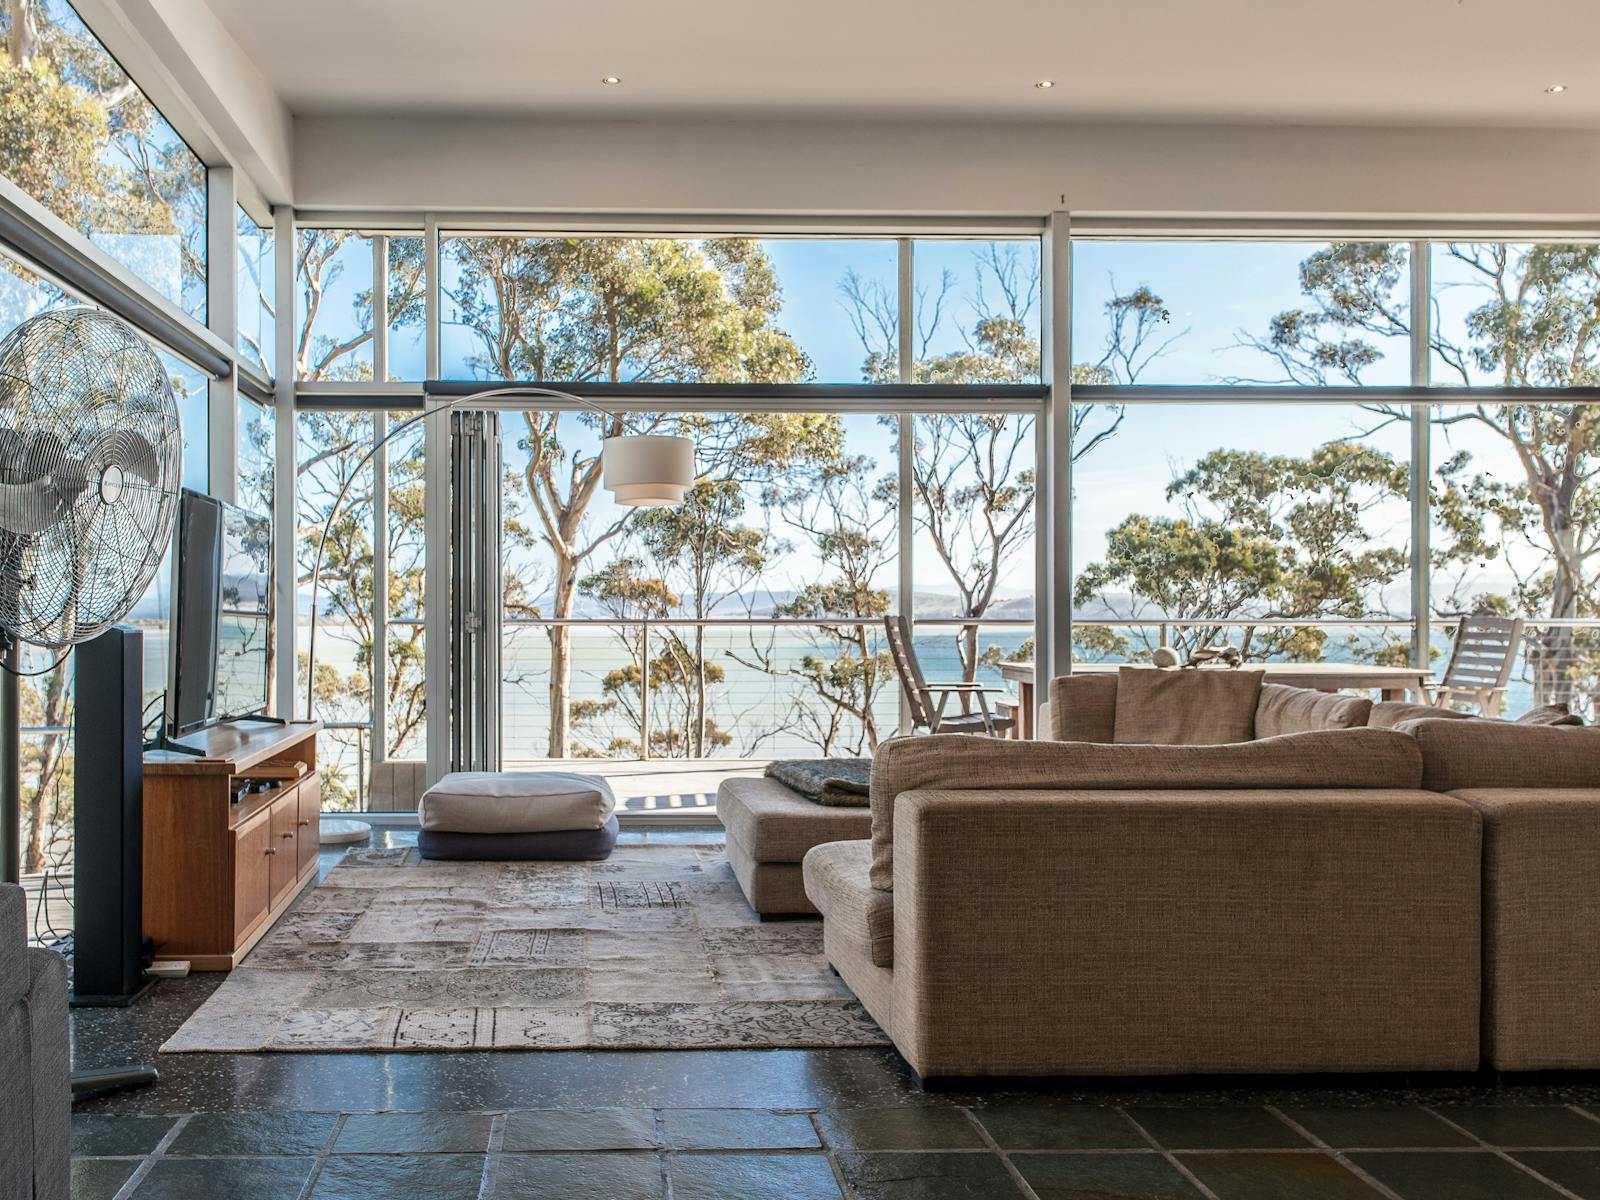 Floor to ceiling windows to capture those spectacular views. Large, comfy couches invite relaxation.